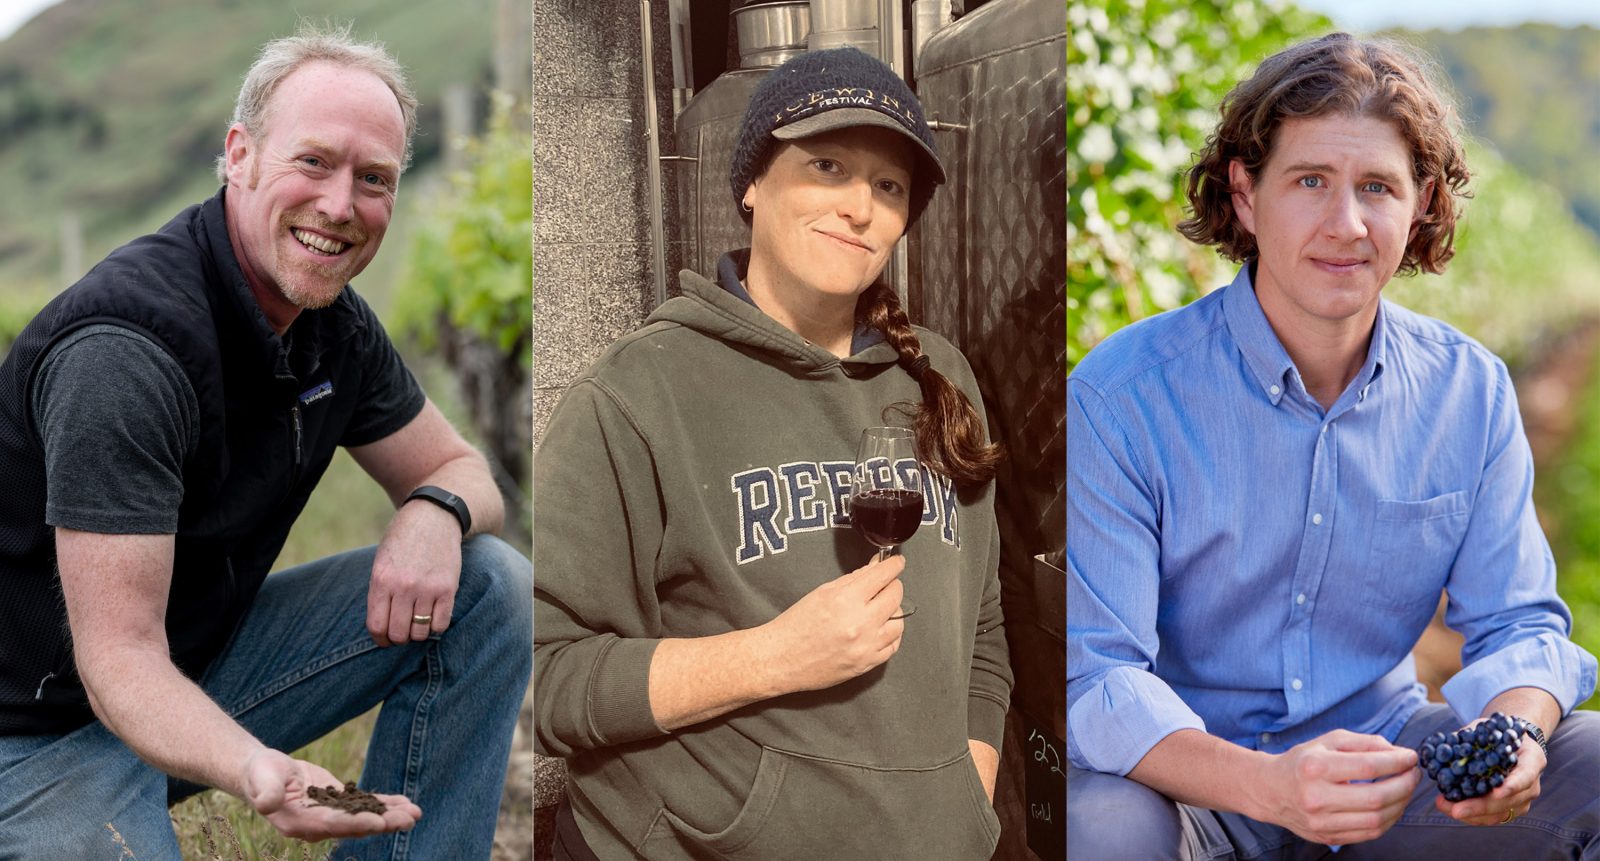 A collage of three images of Brock Oenology and Viticulture graduates Barclay Robinson, Kim Gorman and Gabriel Demarco.